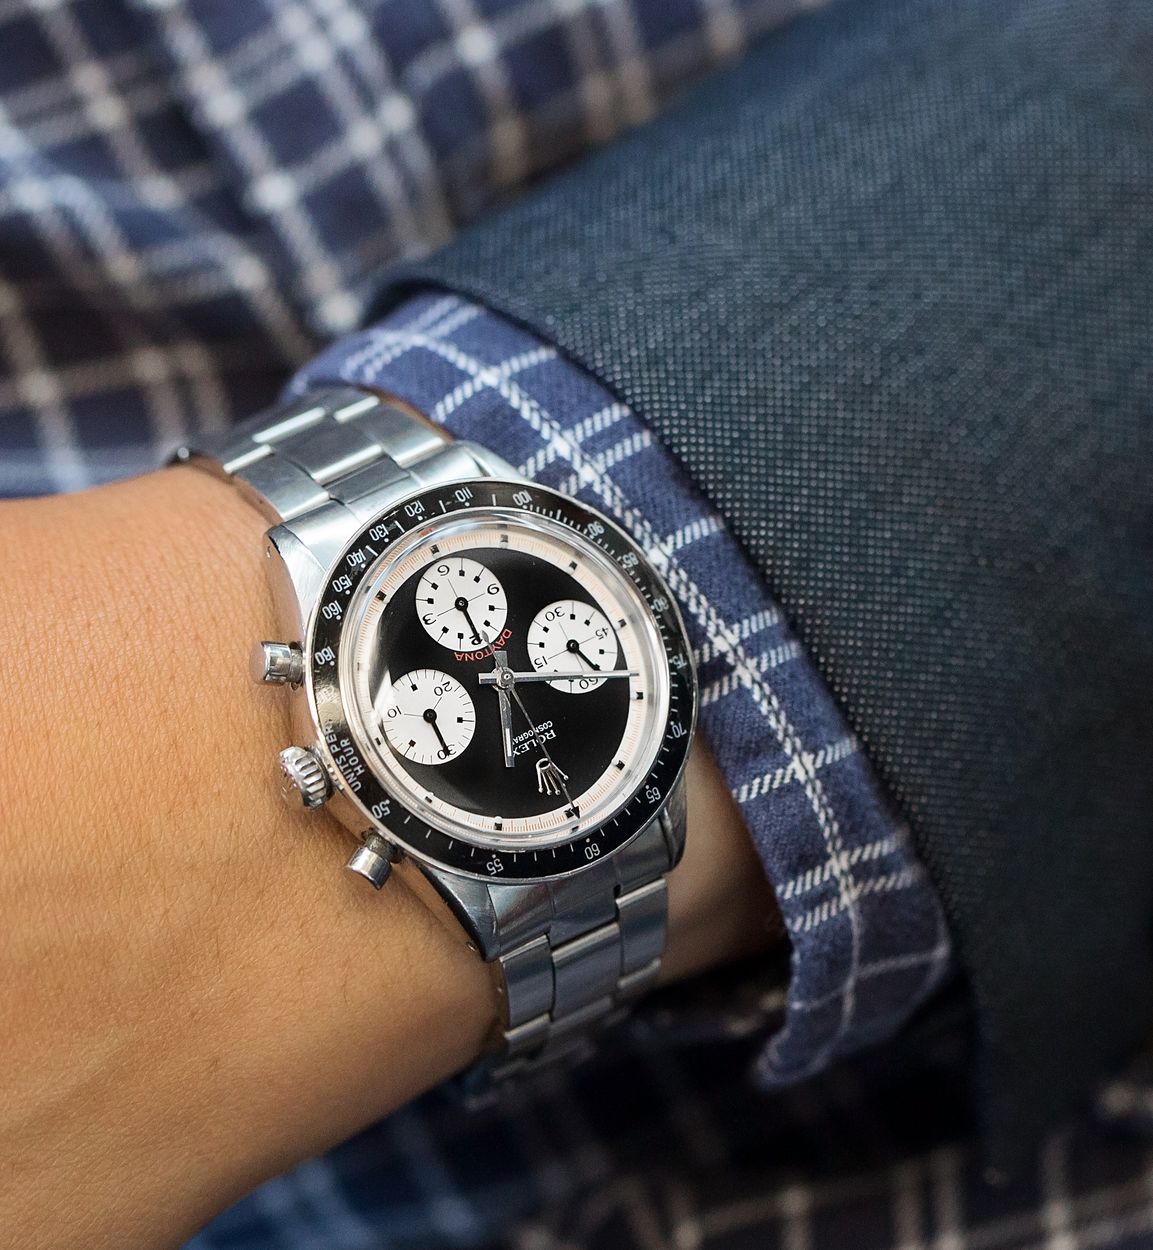 The Rolex Paul Newman Daytona That Was Found in a Couch